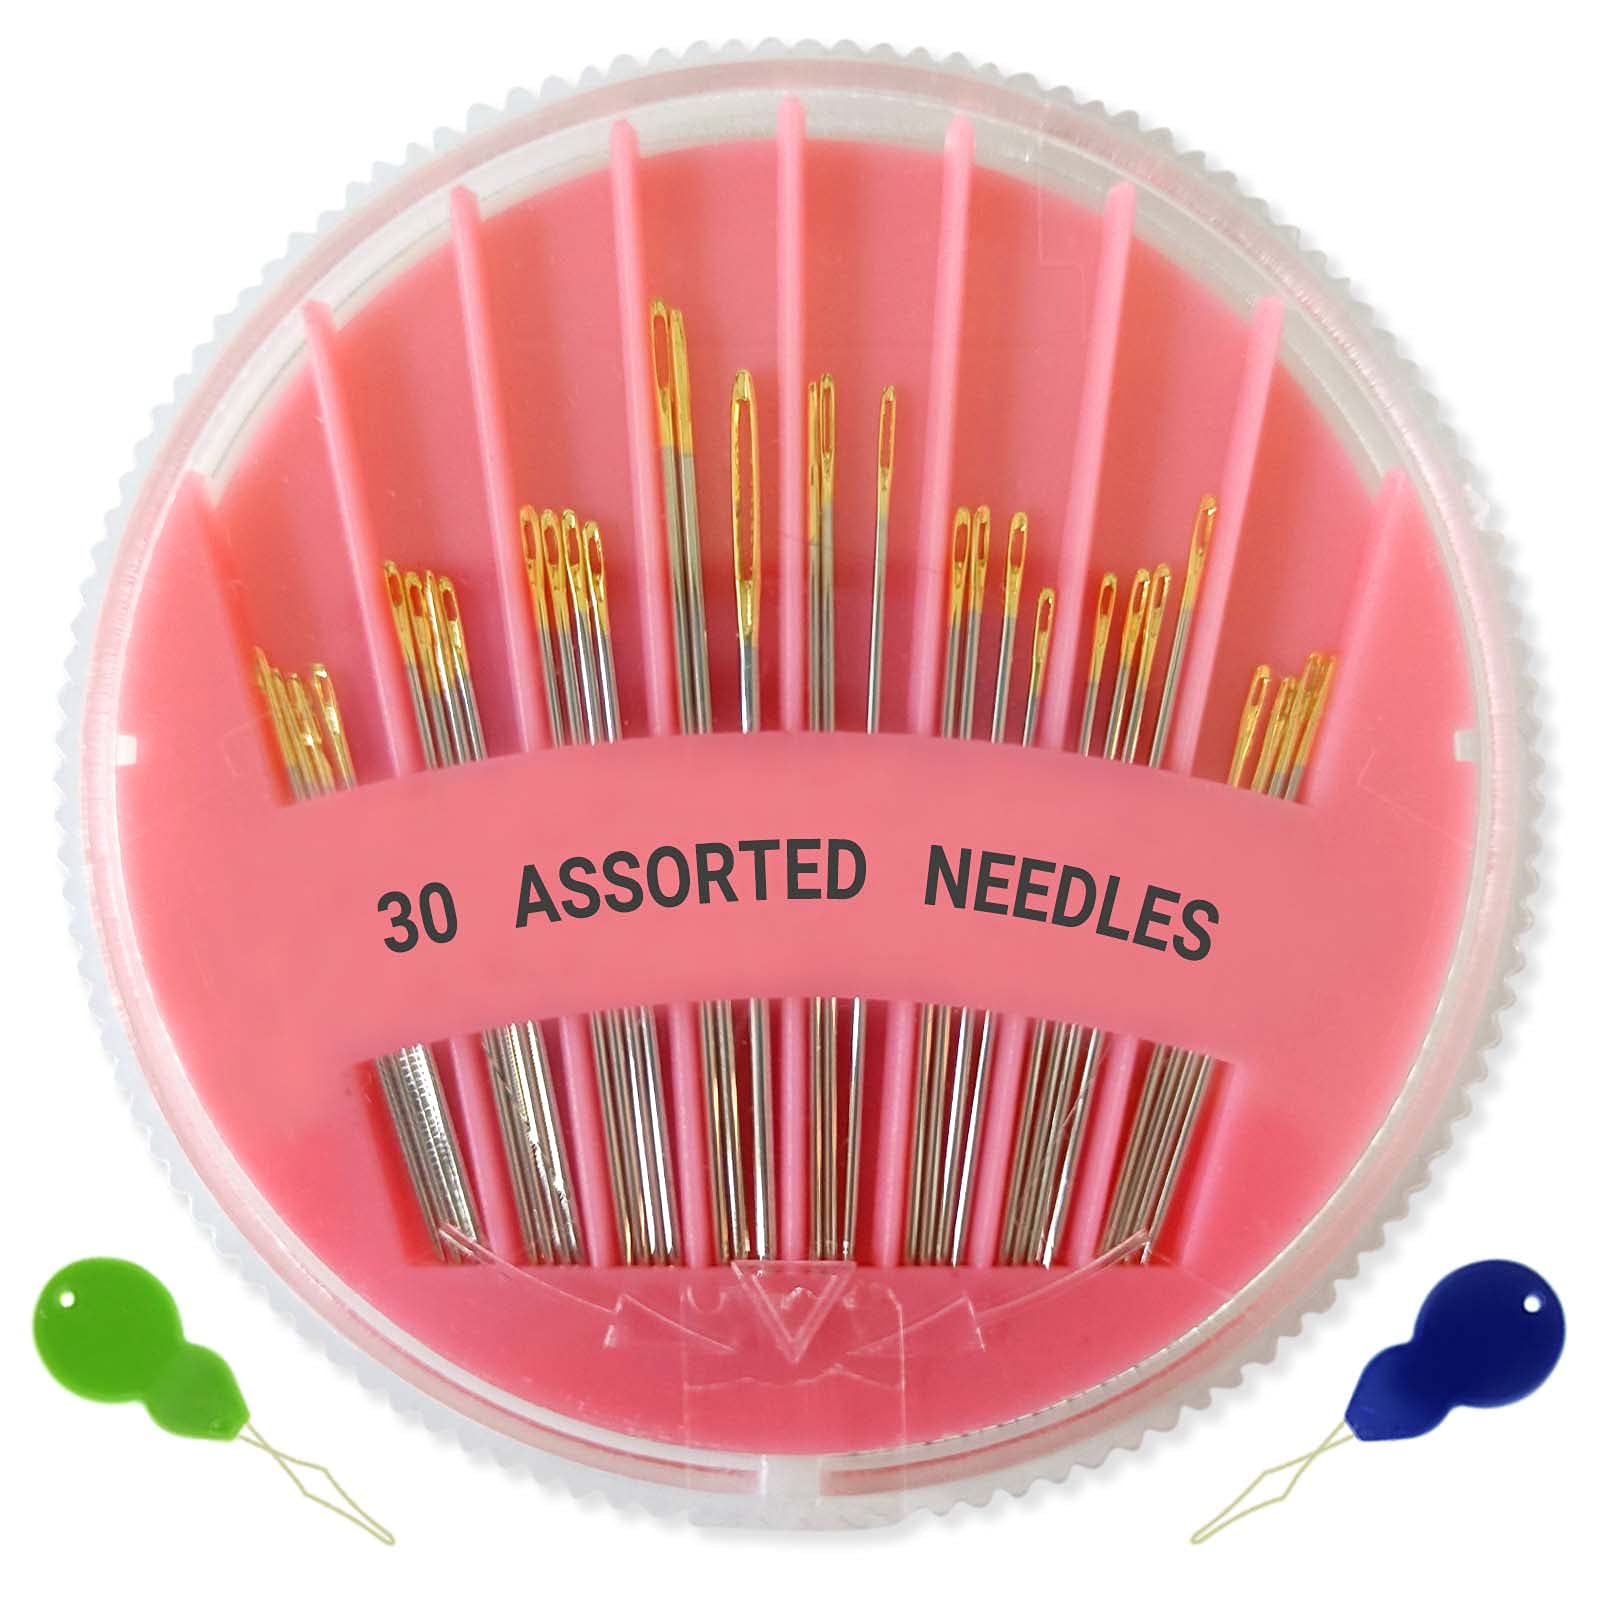 30 count sewing needles, hand needles